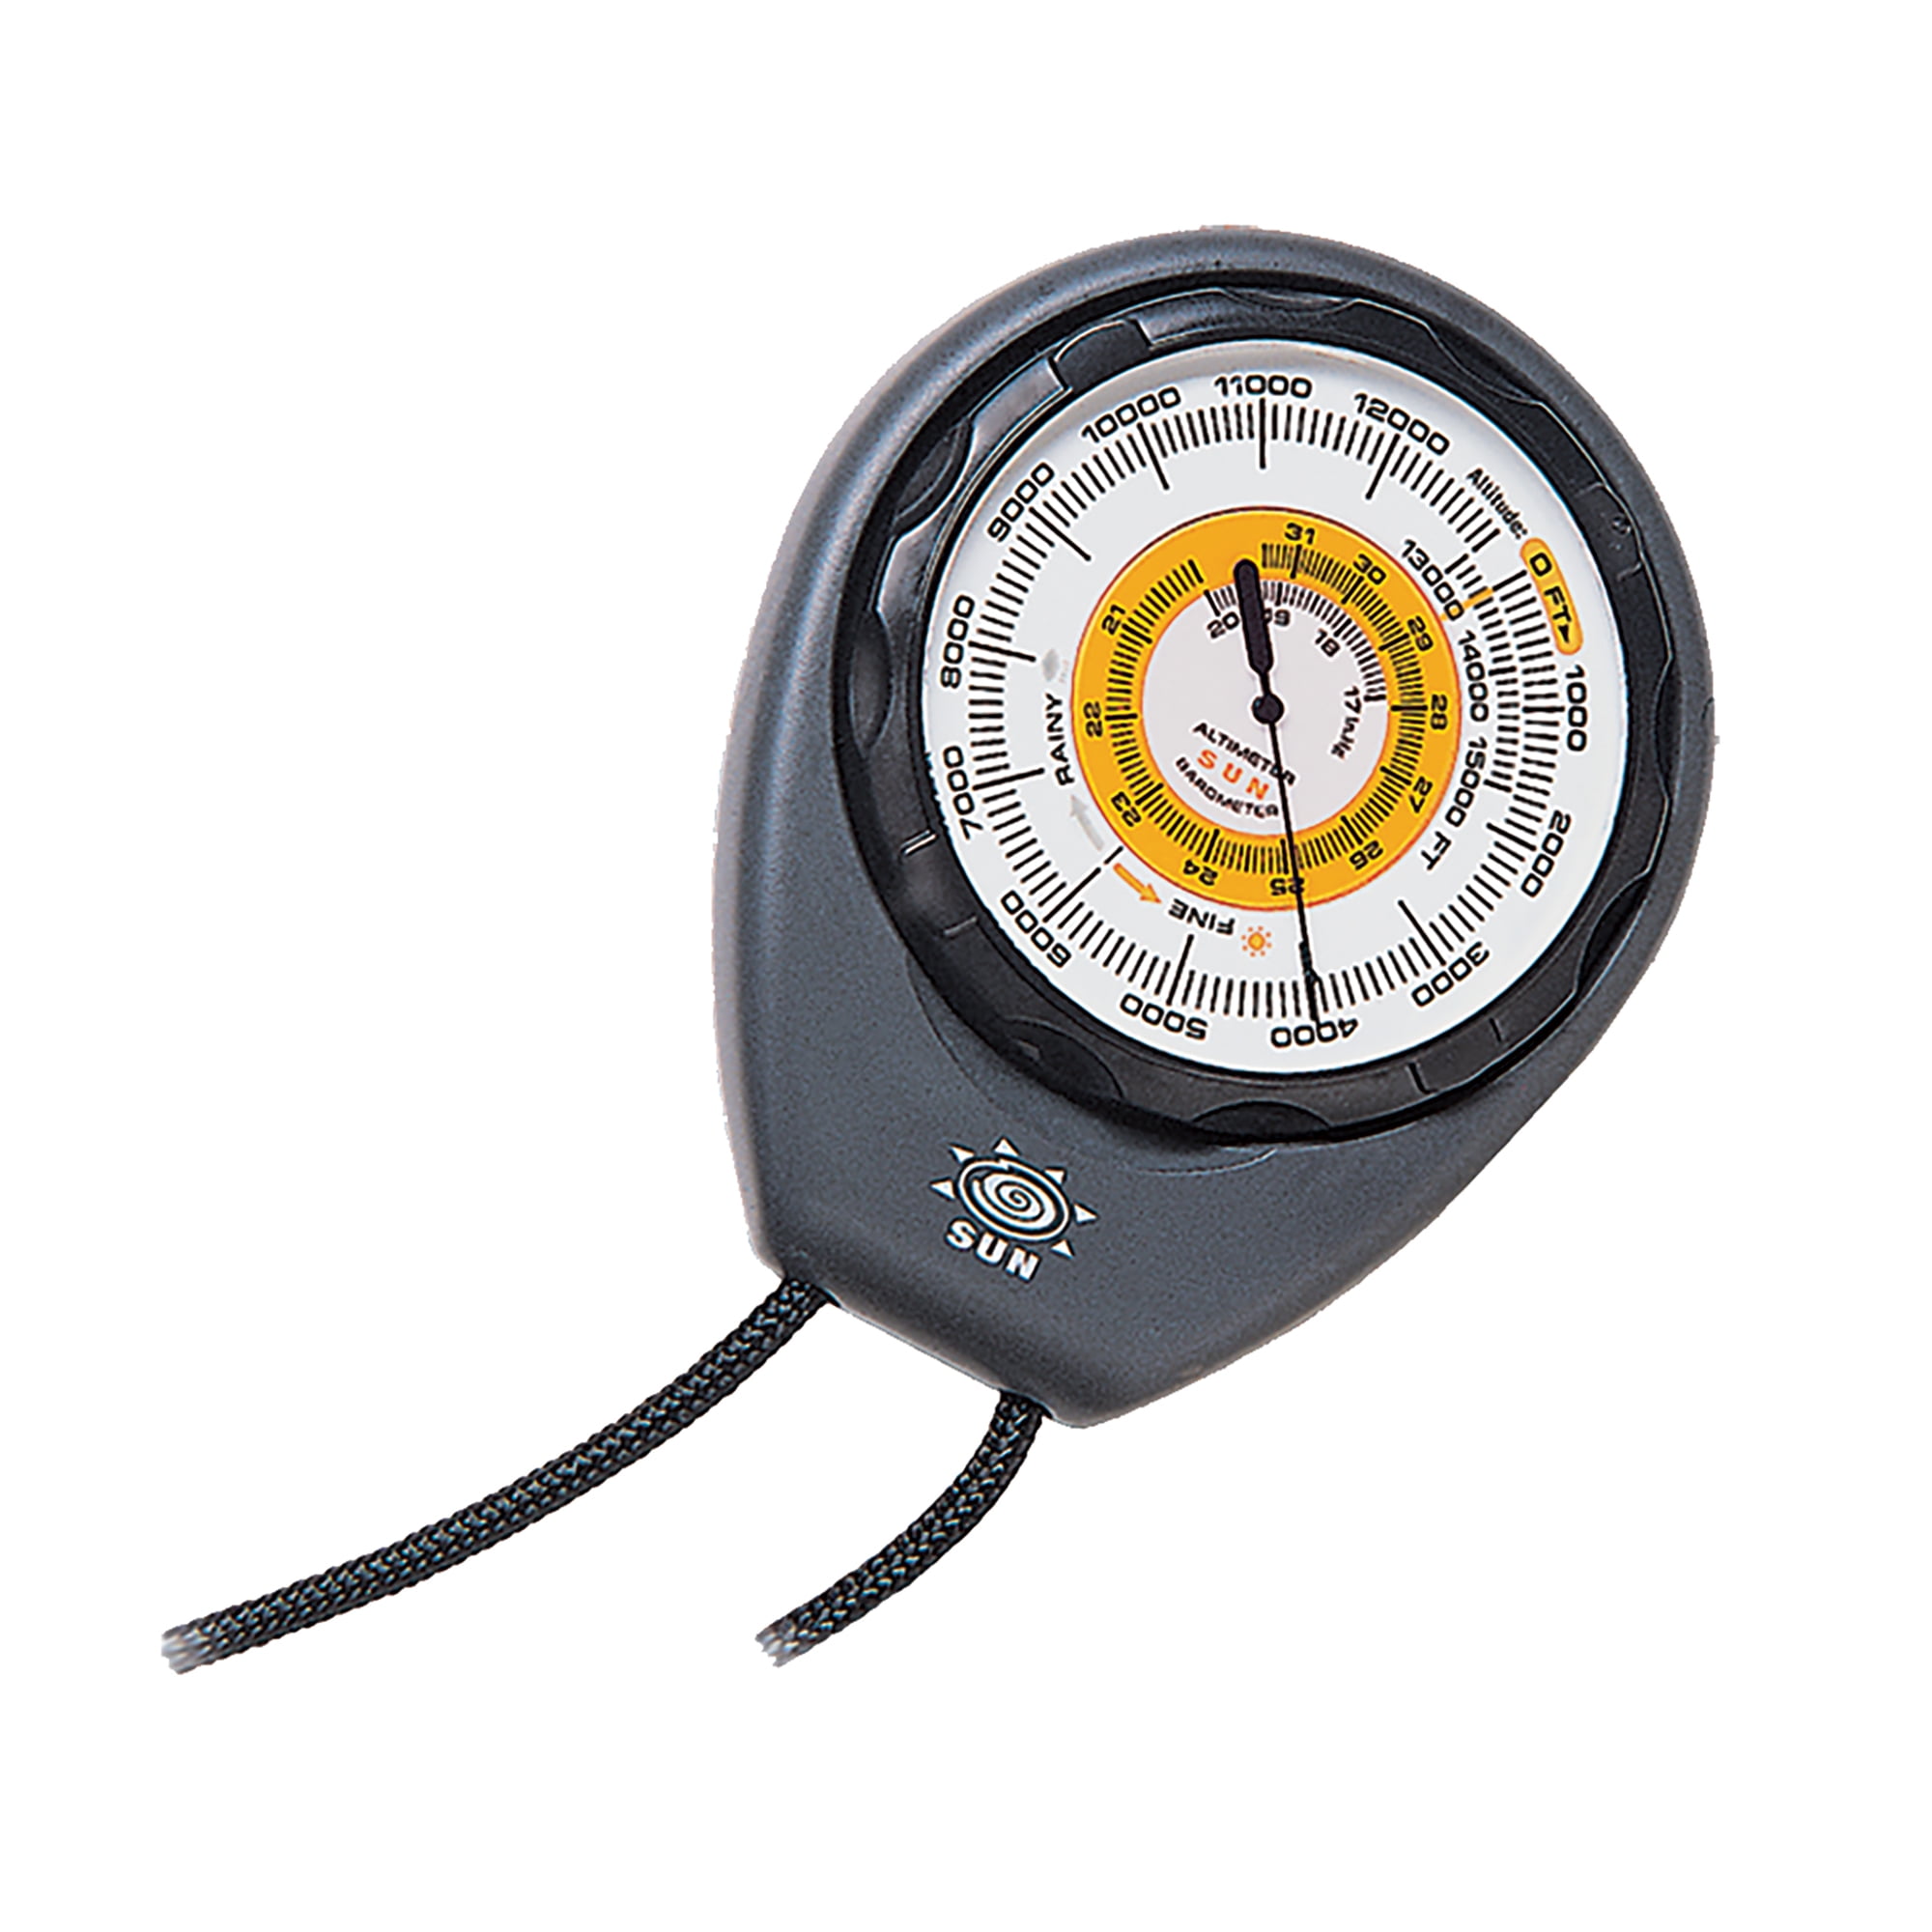  Sun Company Altimeter 203 - Battery-Free Altimeter and  Barometer, Weather-Trend Indicator with Rugged ABS Case and Lanyard